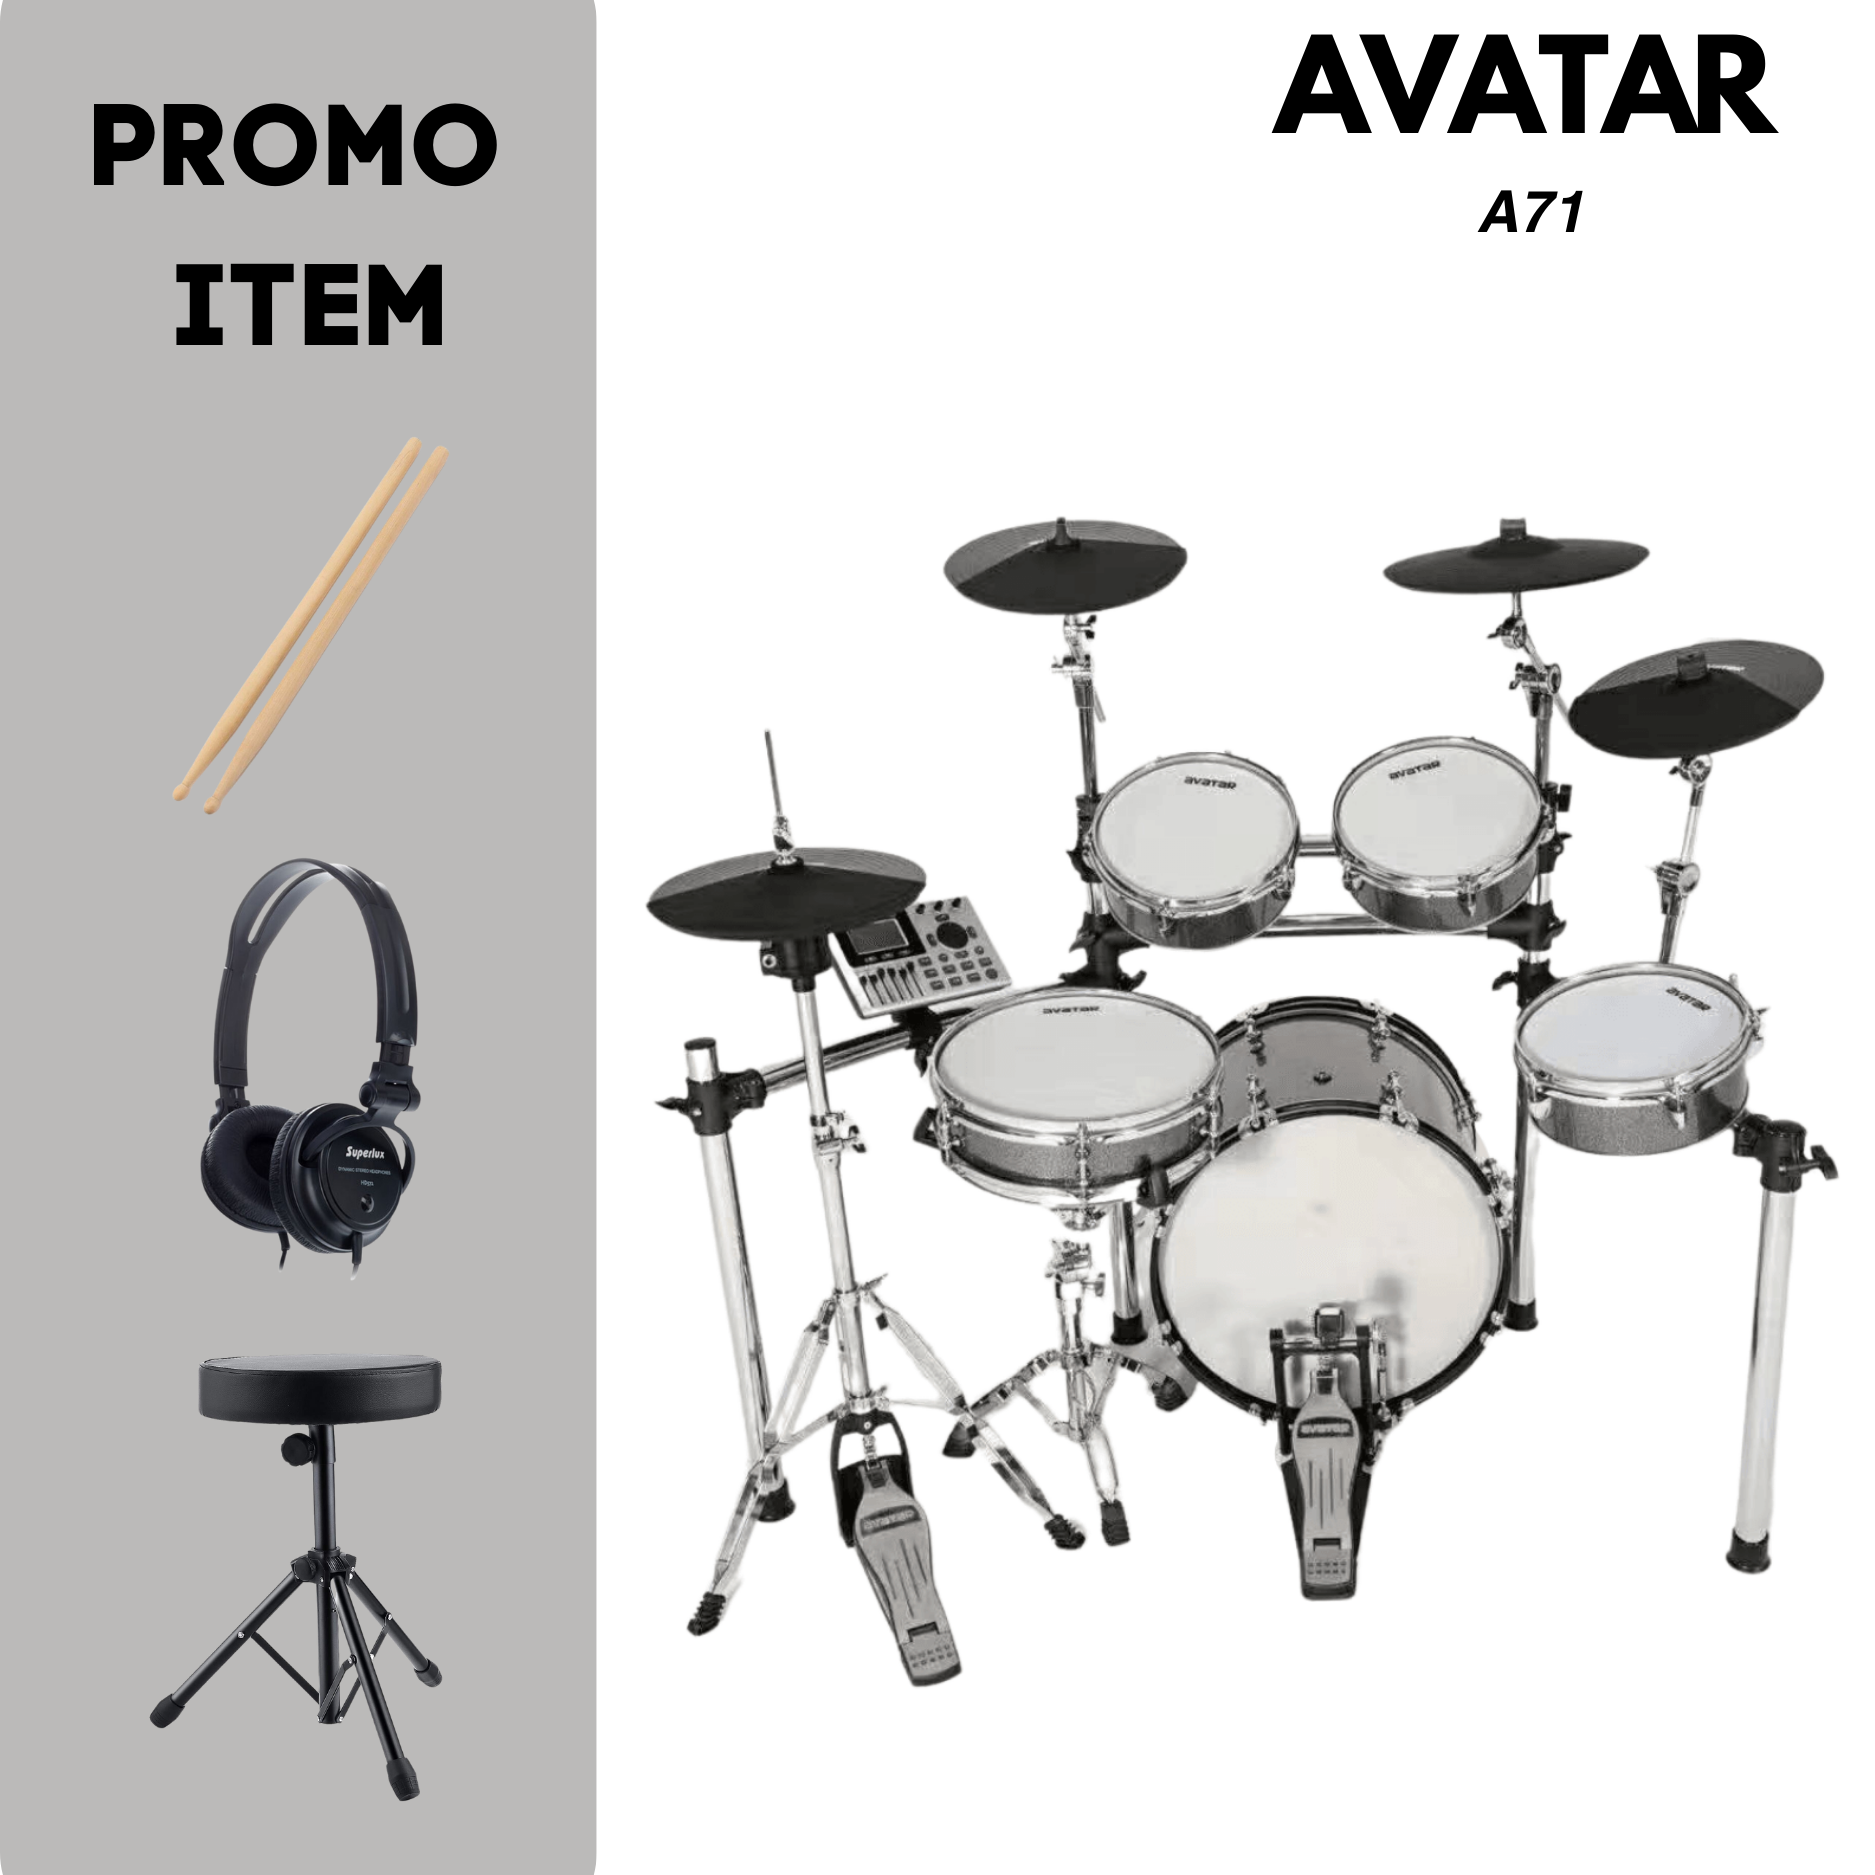 Avatar A71  With Promo Items Zoso Music